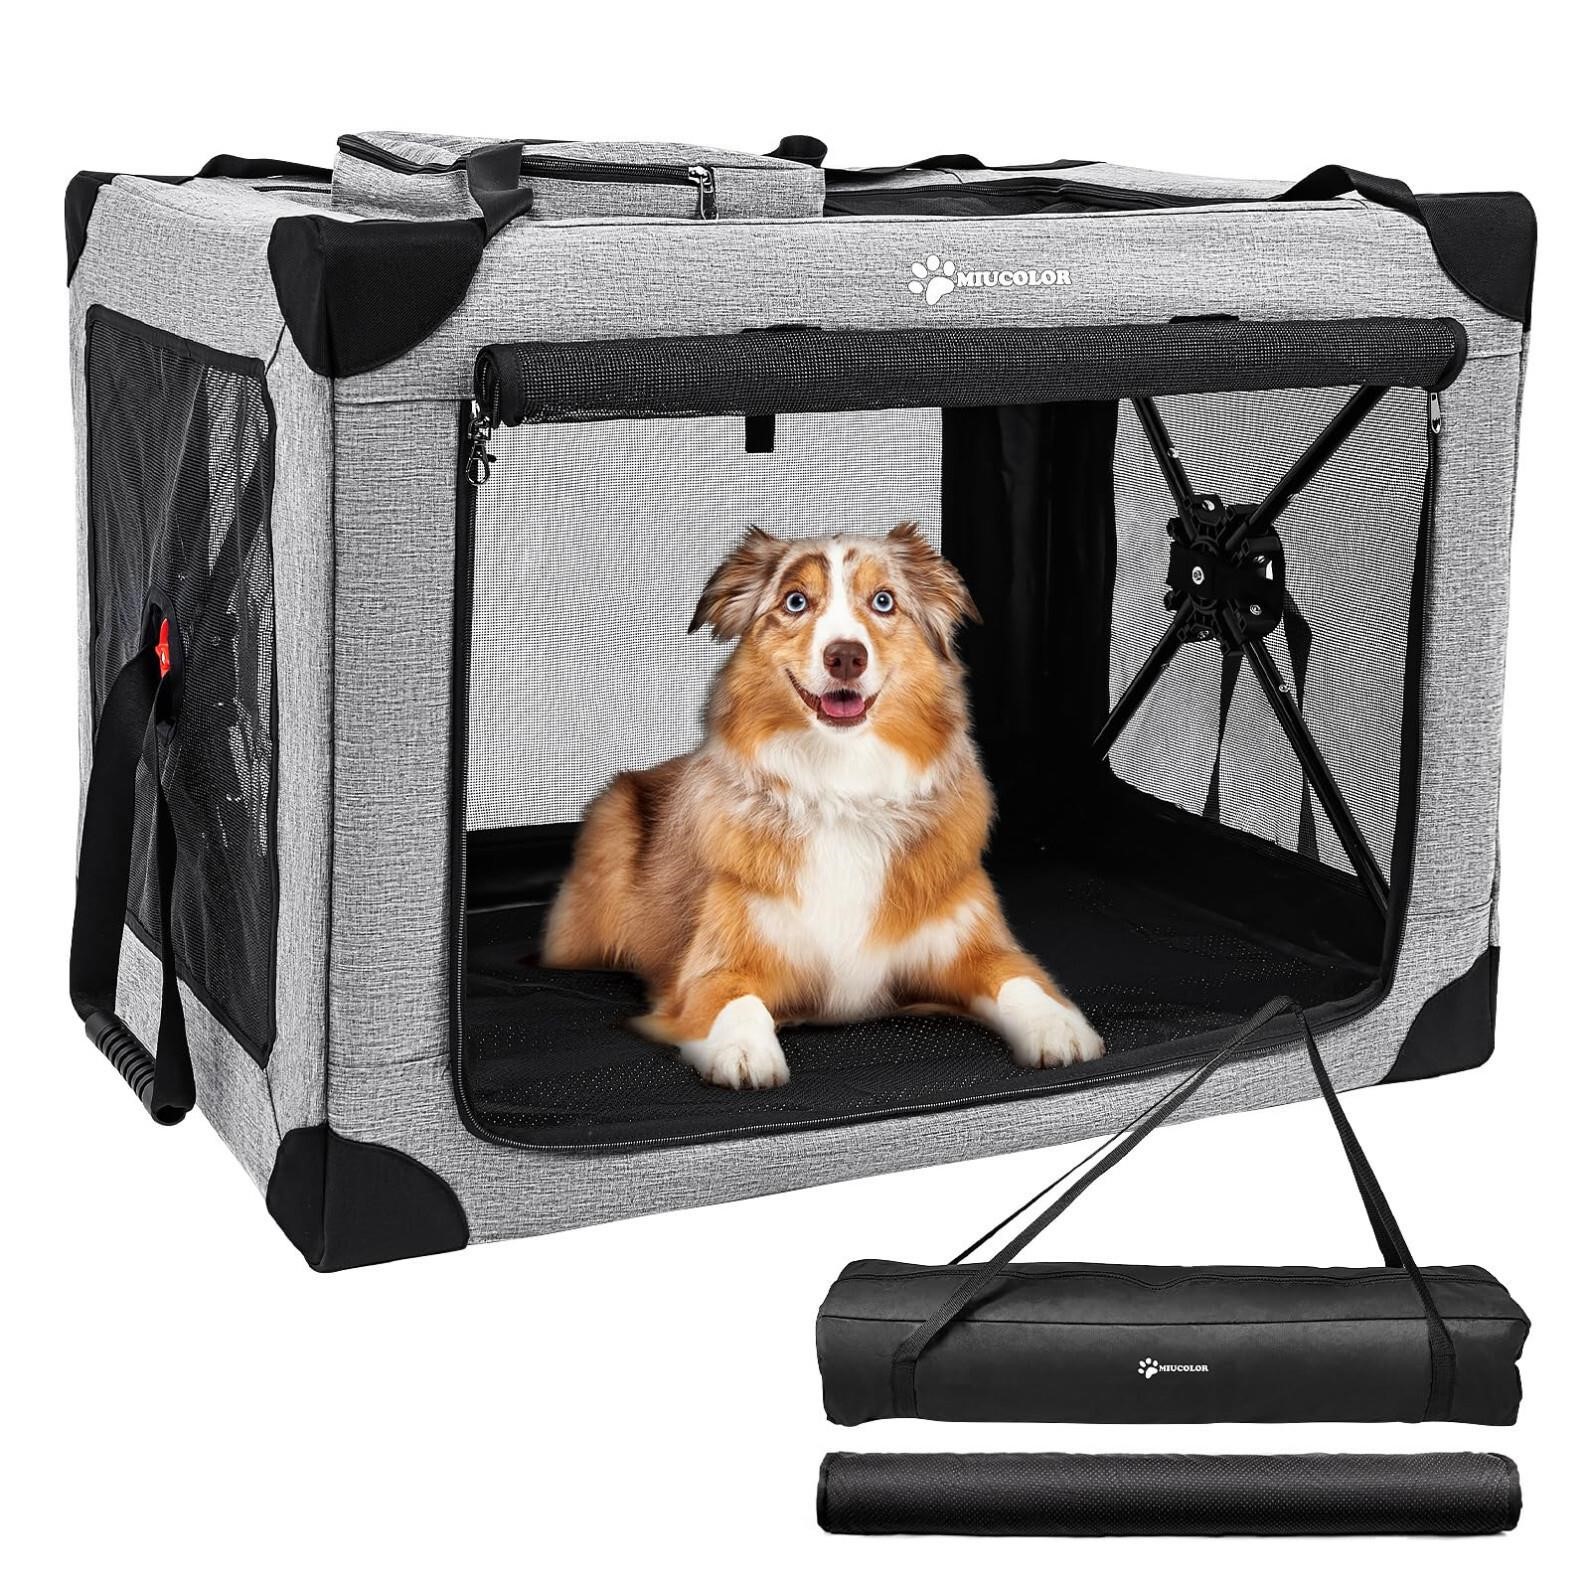 MIU COLOR Portable Quick Set-up Dog Crate for Med